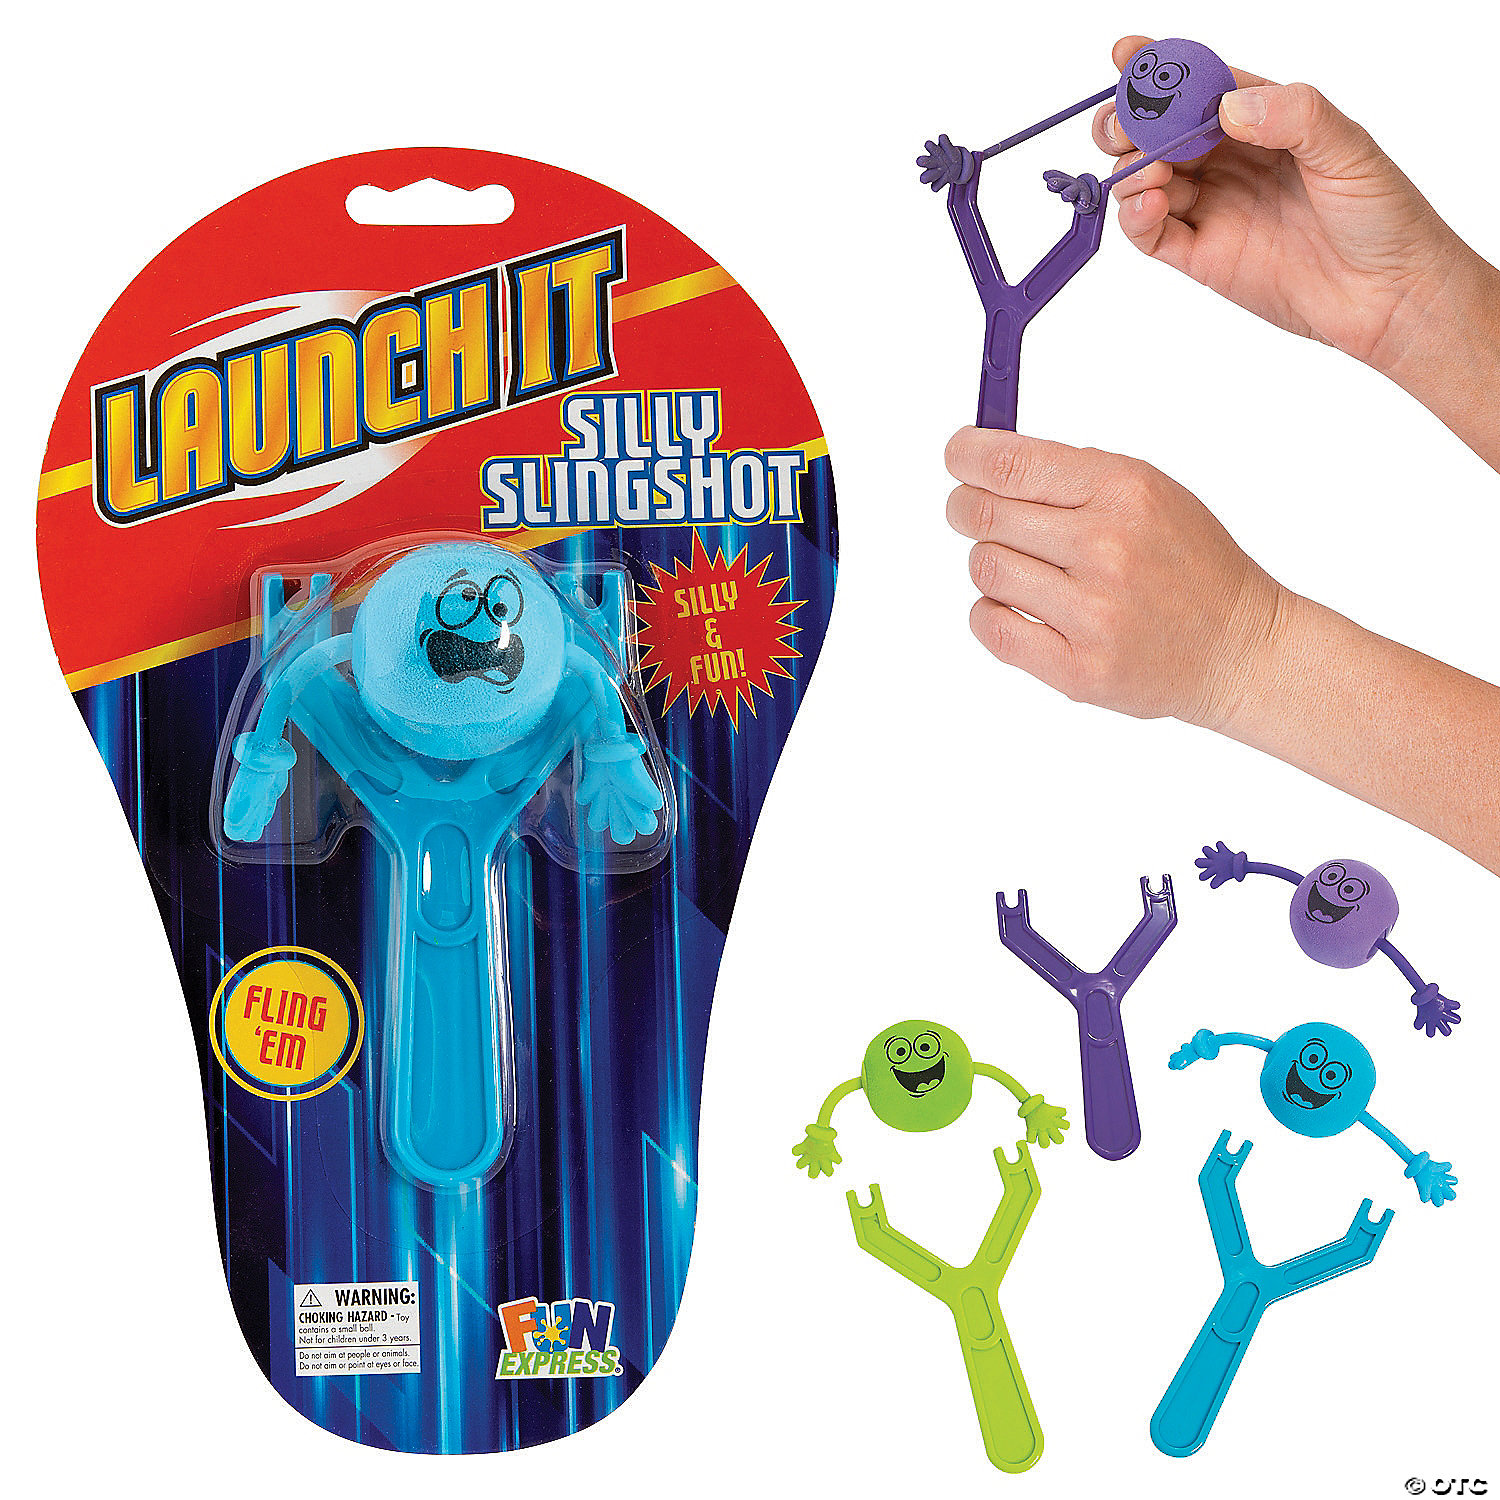 Launch IT Silly Slingshot Shooters